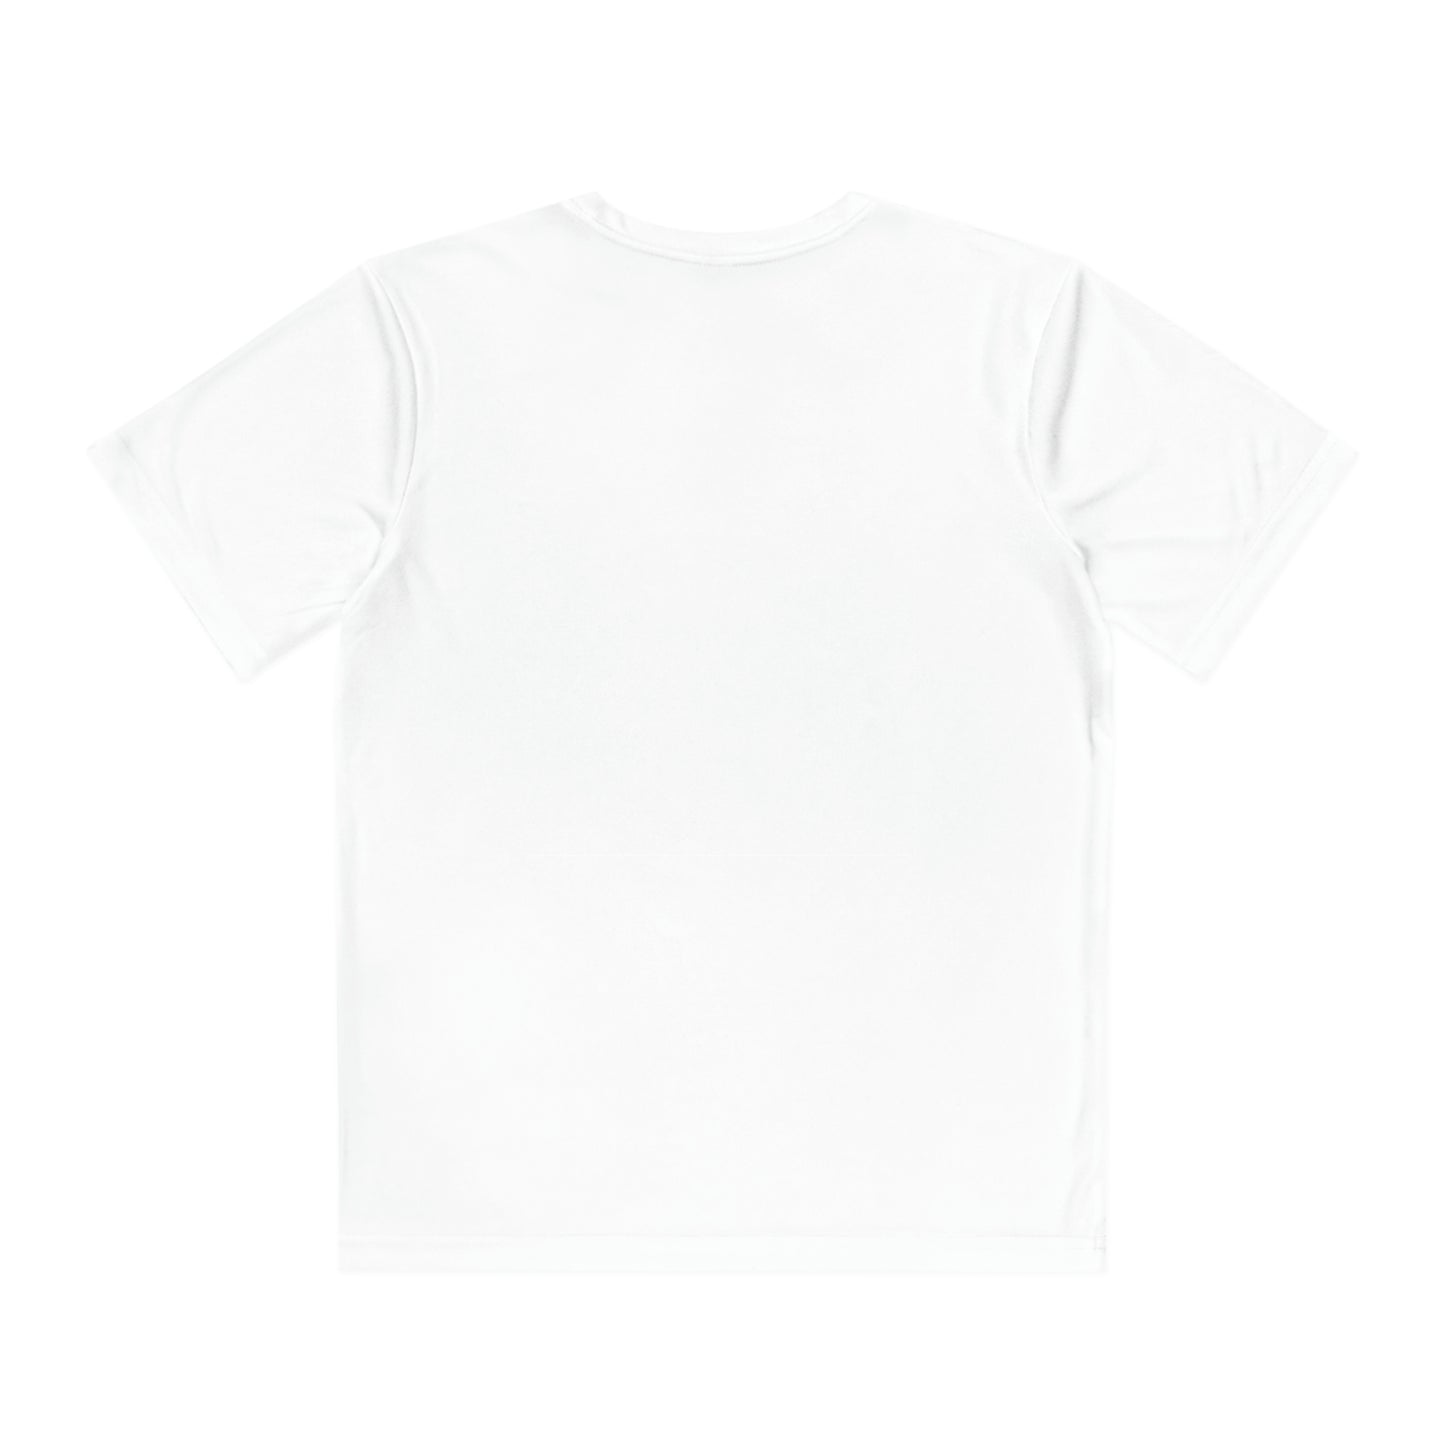 Youth Flag Dry-Fit Tee [Design 3]